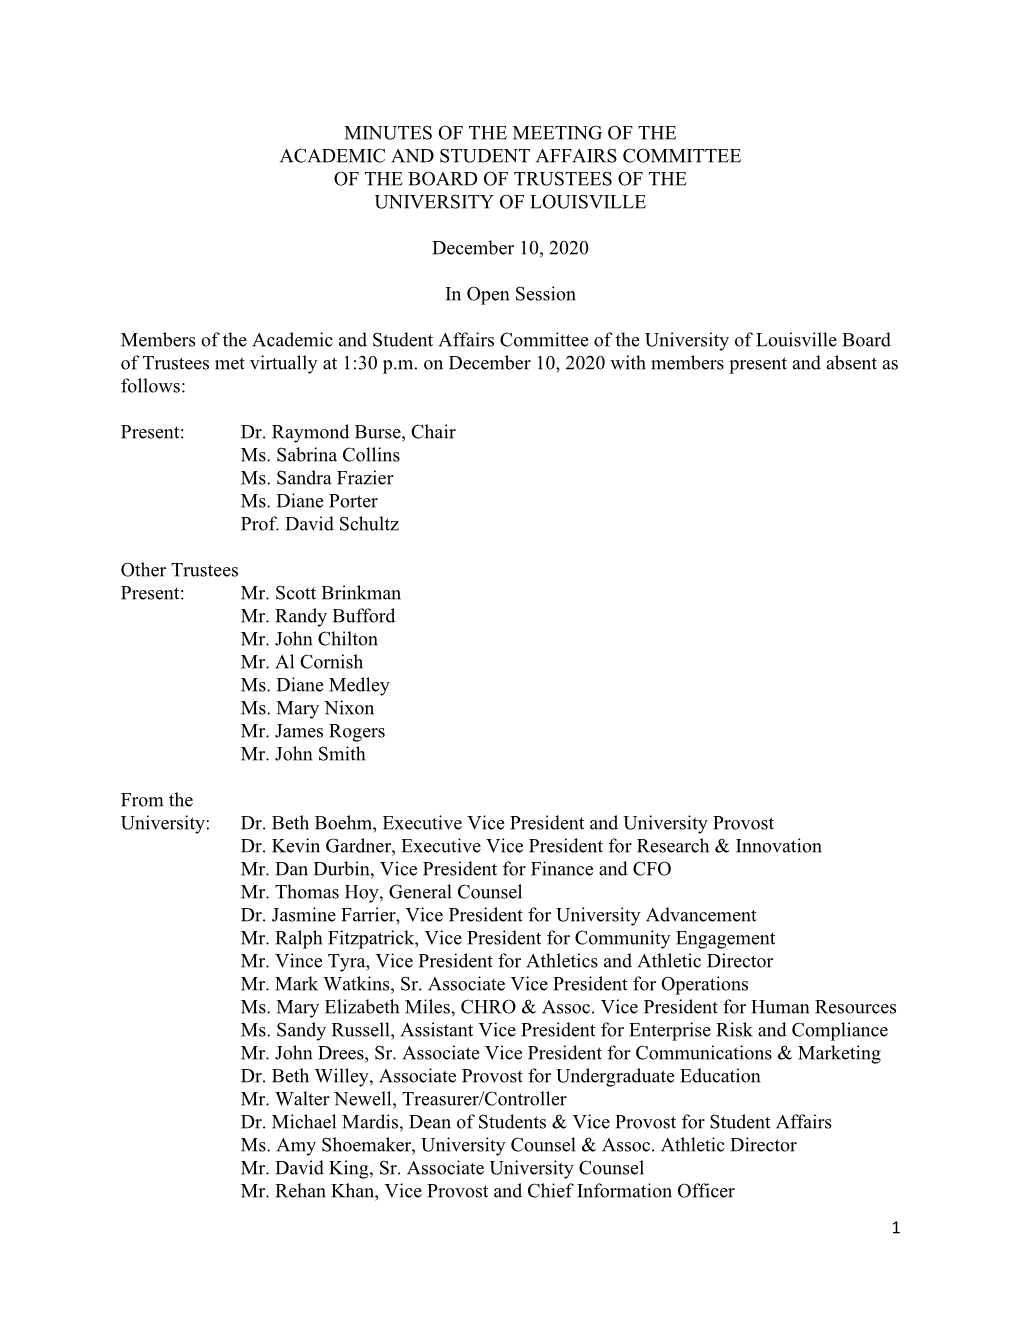 Minutes of the Meeting of the Academic and Student Affairs Committee of the Board of Trustees of the University of Louisville